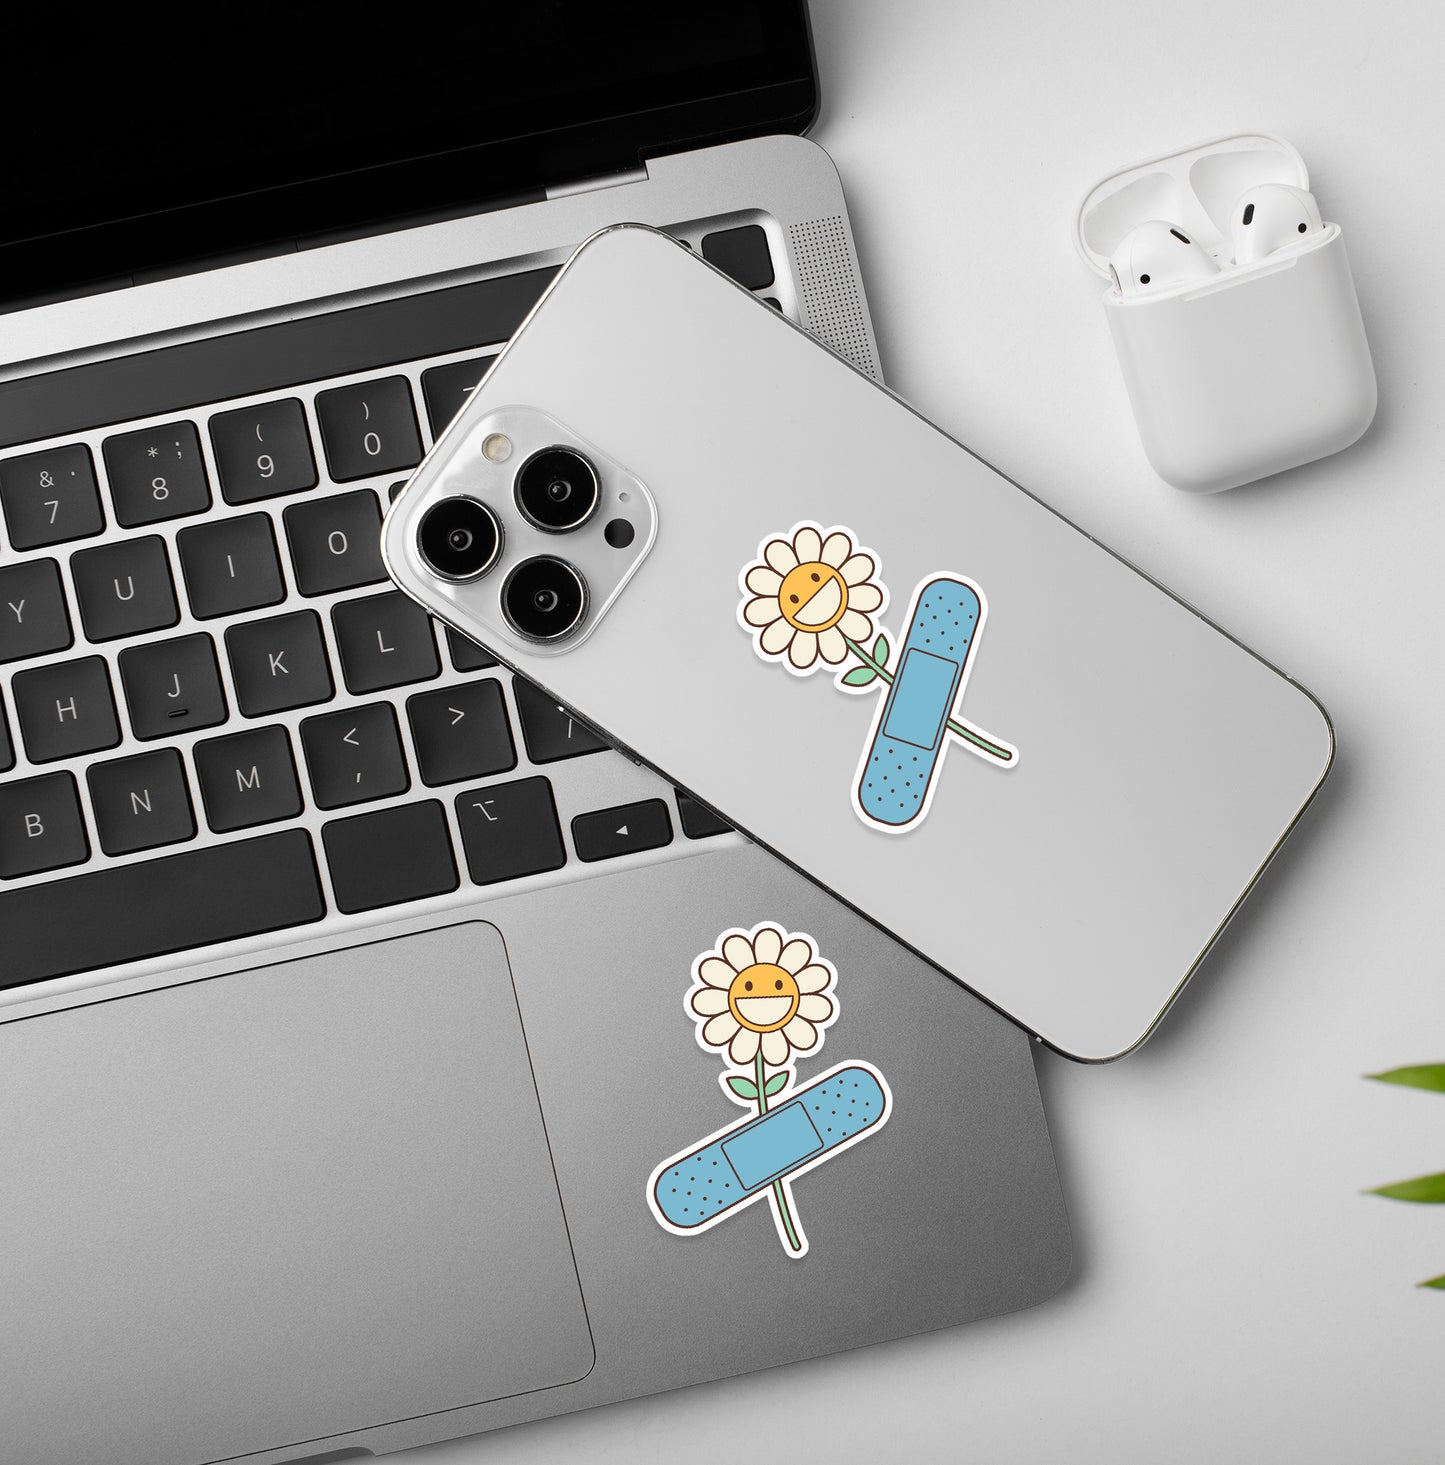 Flower Band-aid | Mobile & Laptop Sticker